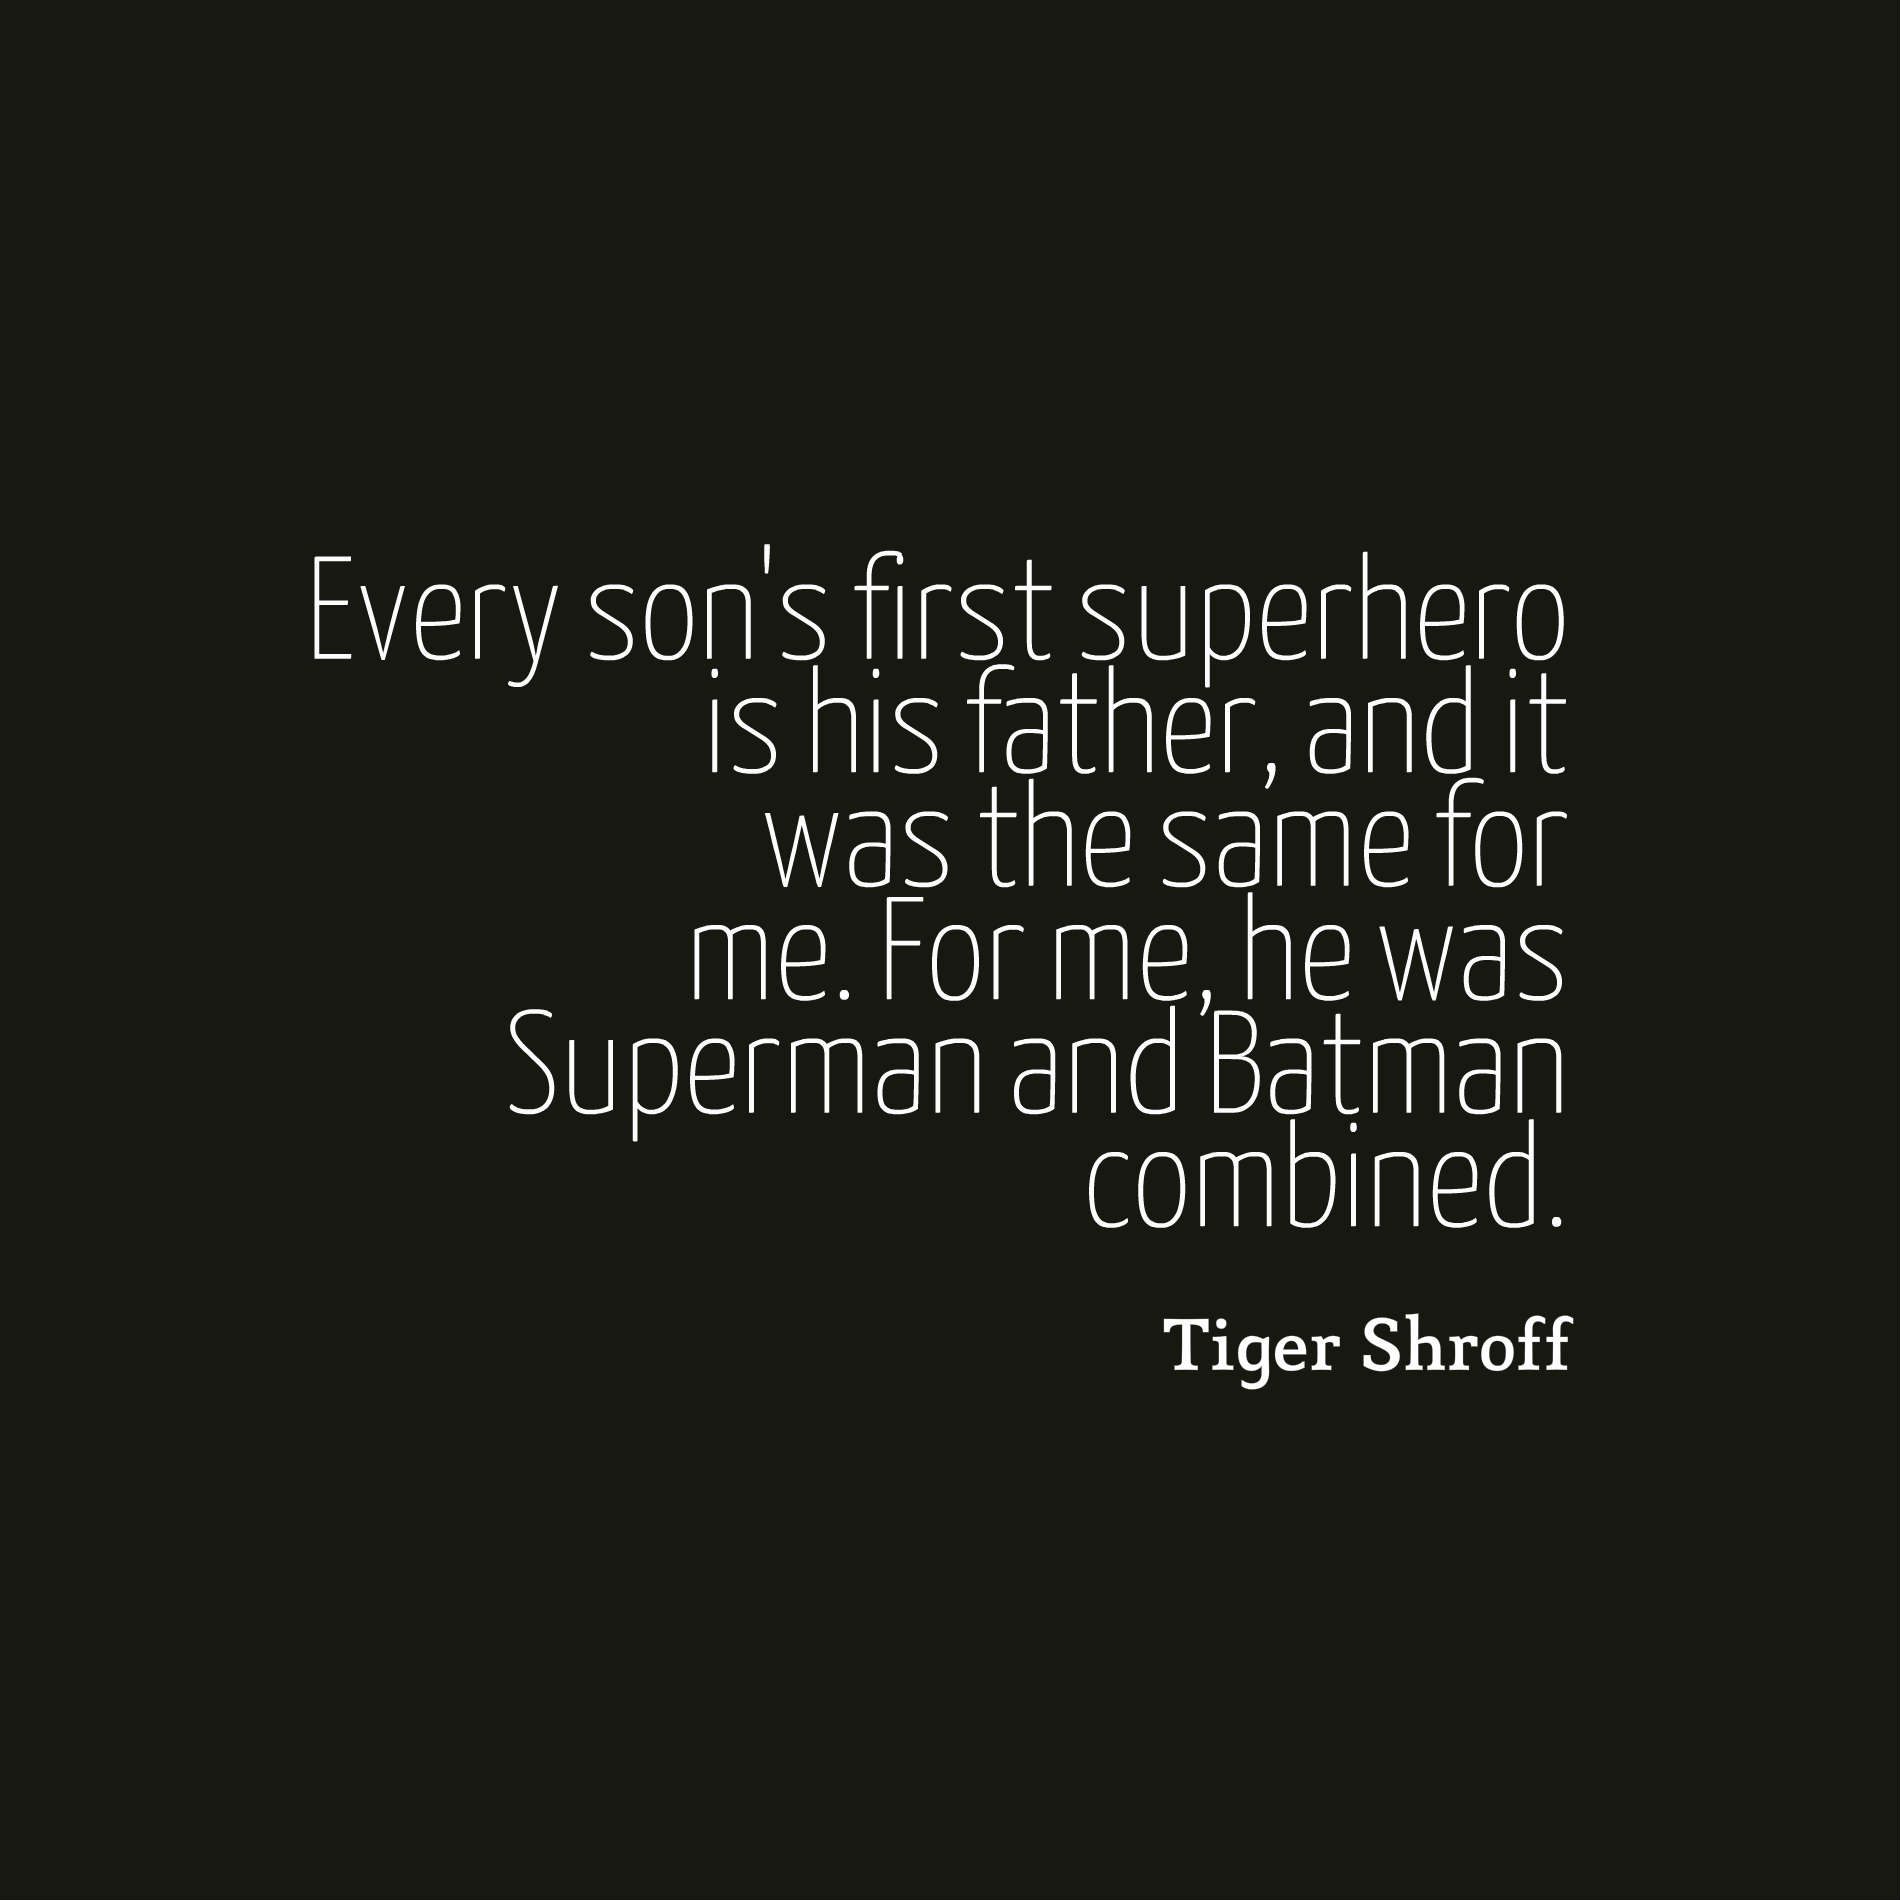 Every son's first superhero is his father, and it was the same for me. For me, he was Superman and Batman combined.